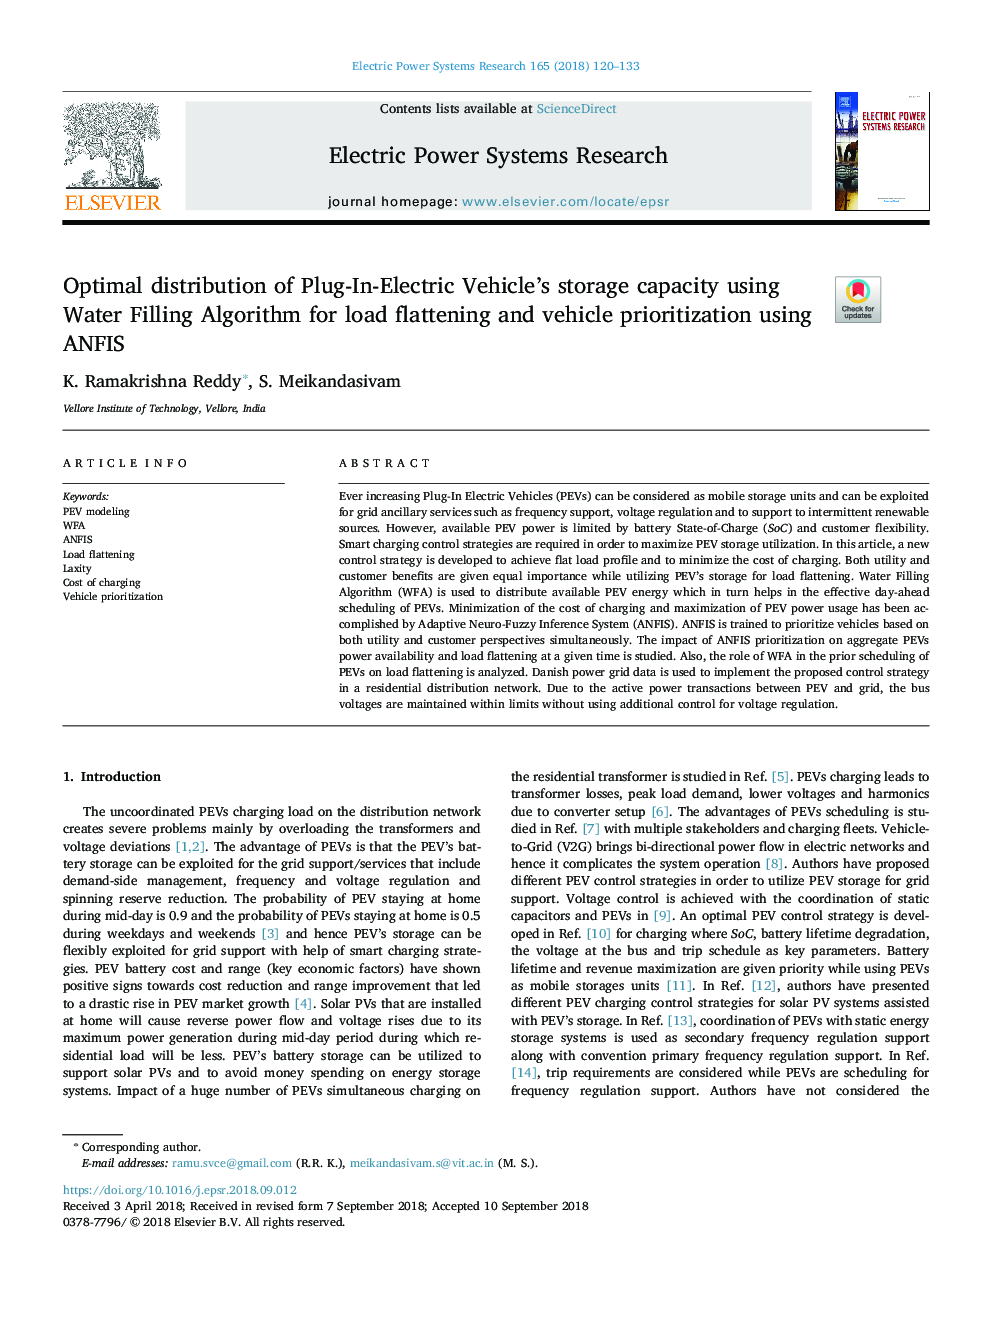 Optimal distribution of Plug-In-Electric Vehicle's storage capacity using Water Filling Algorithm for load flattening and vehicle prioritization using ANFIS